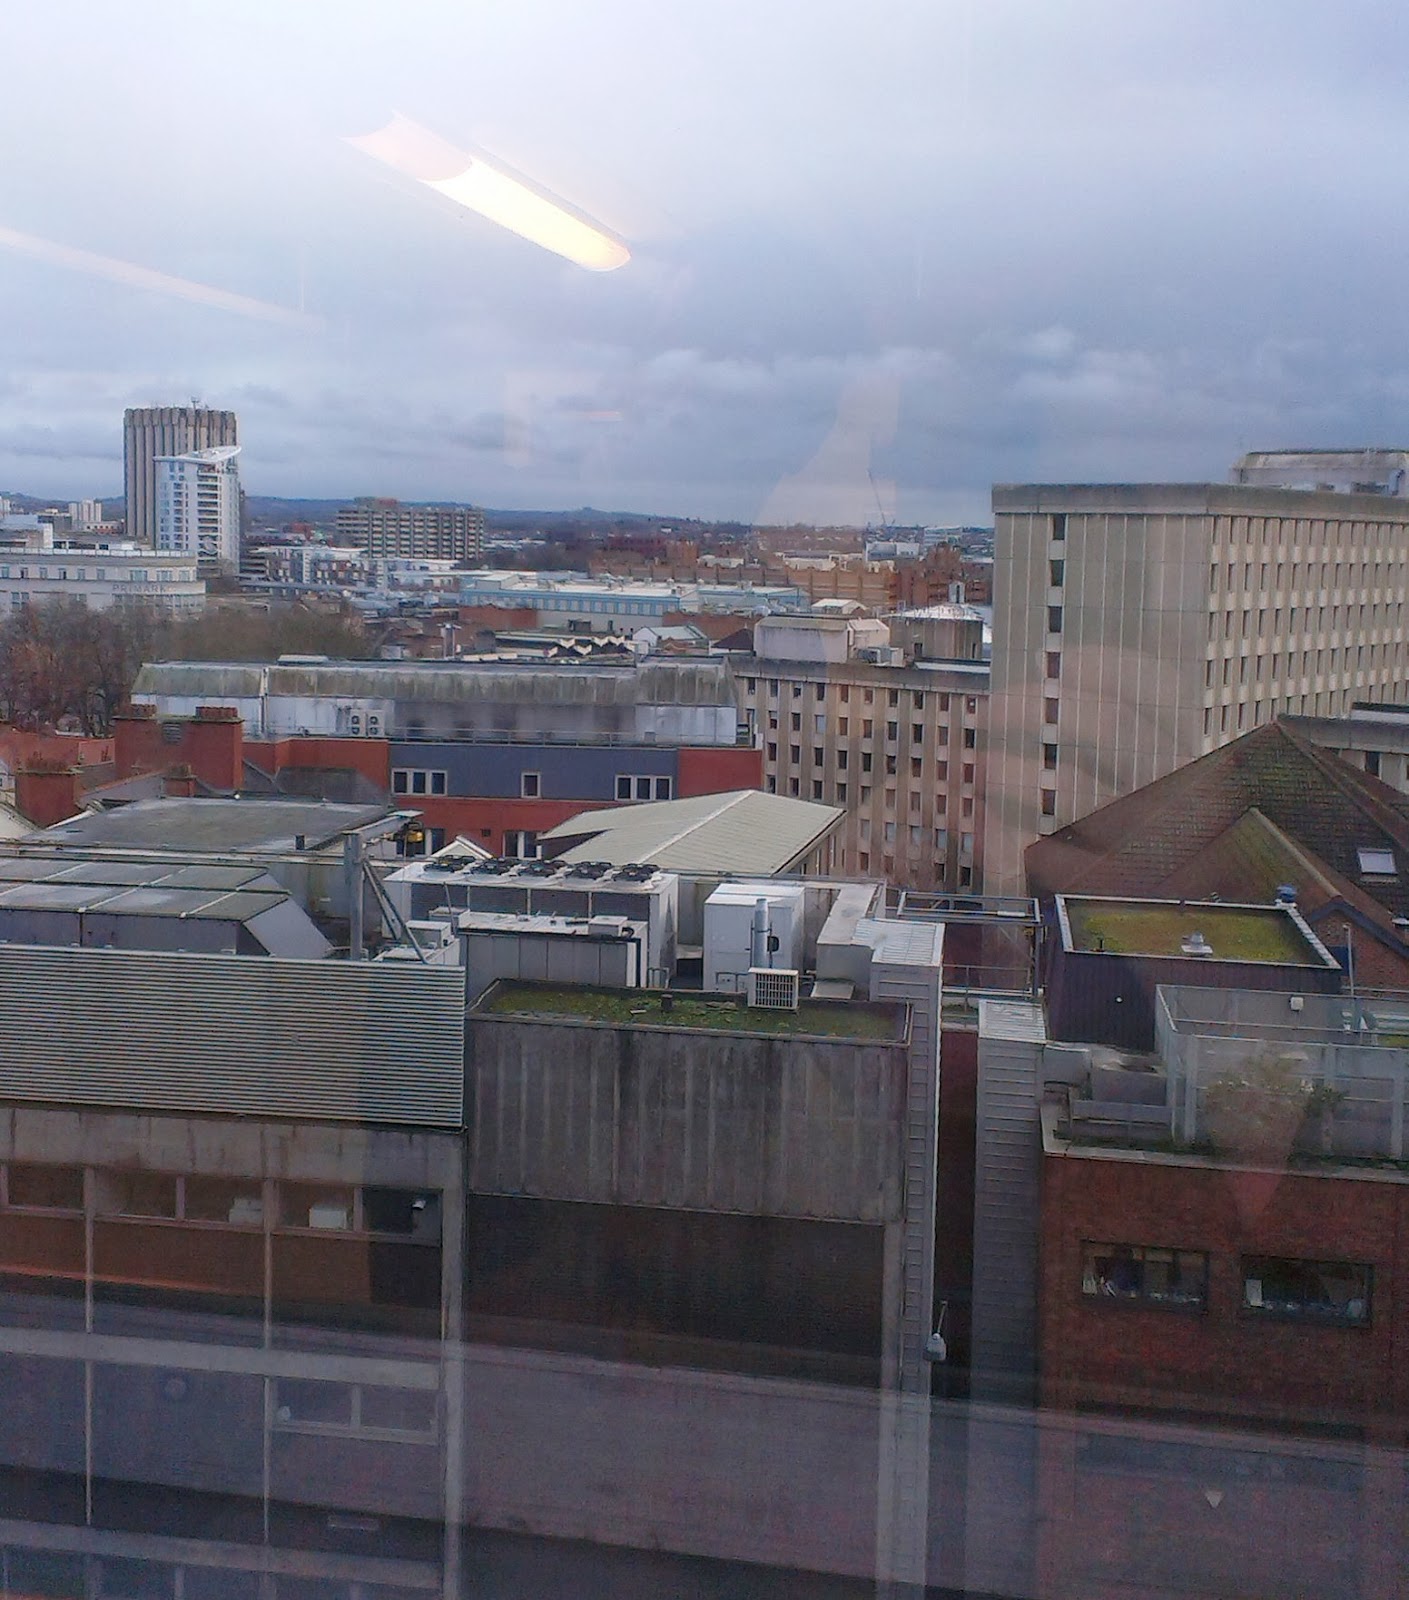 View of Bristol from Level 6 of the Bristol Royal Infirmary